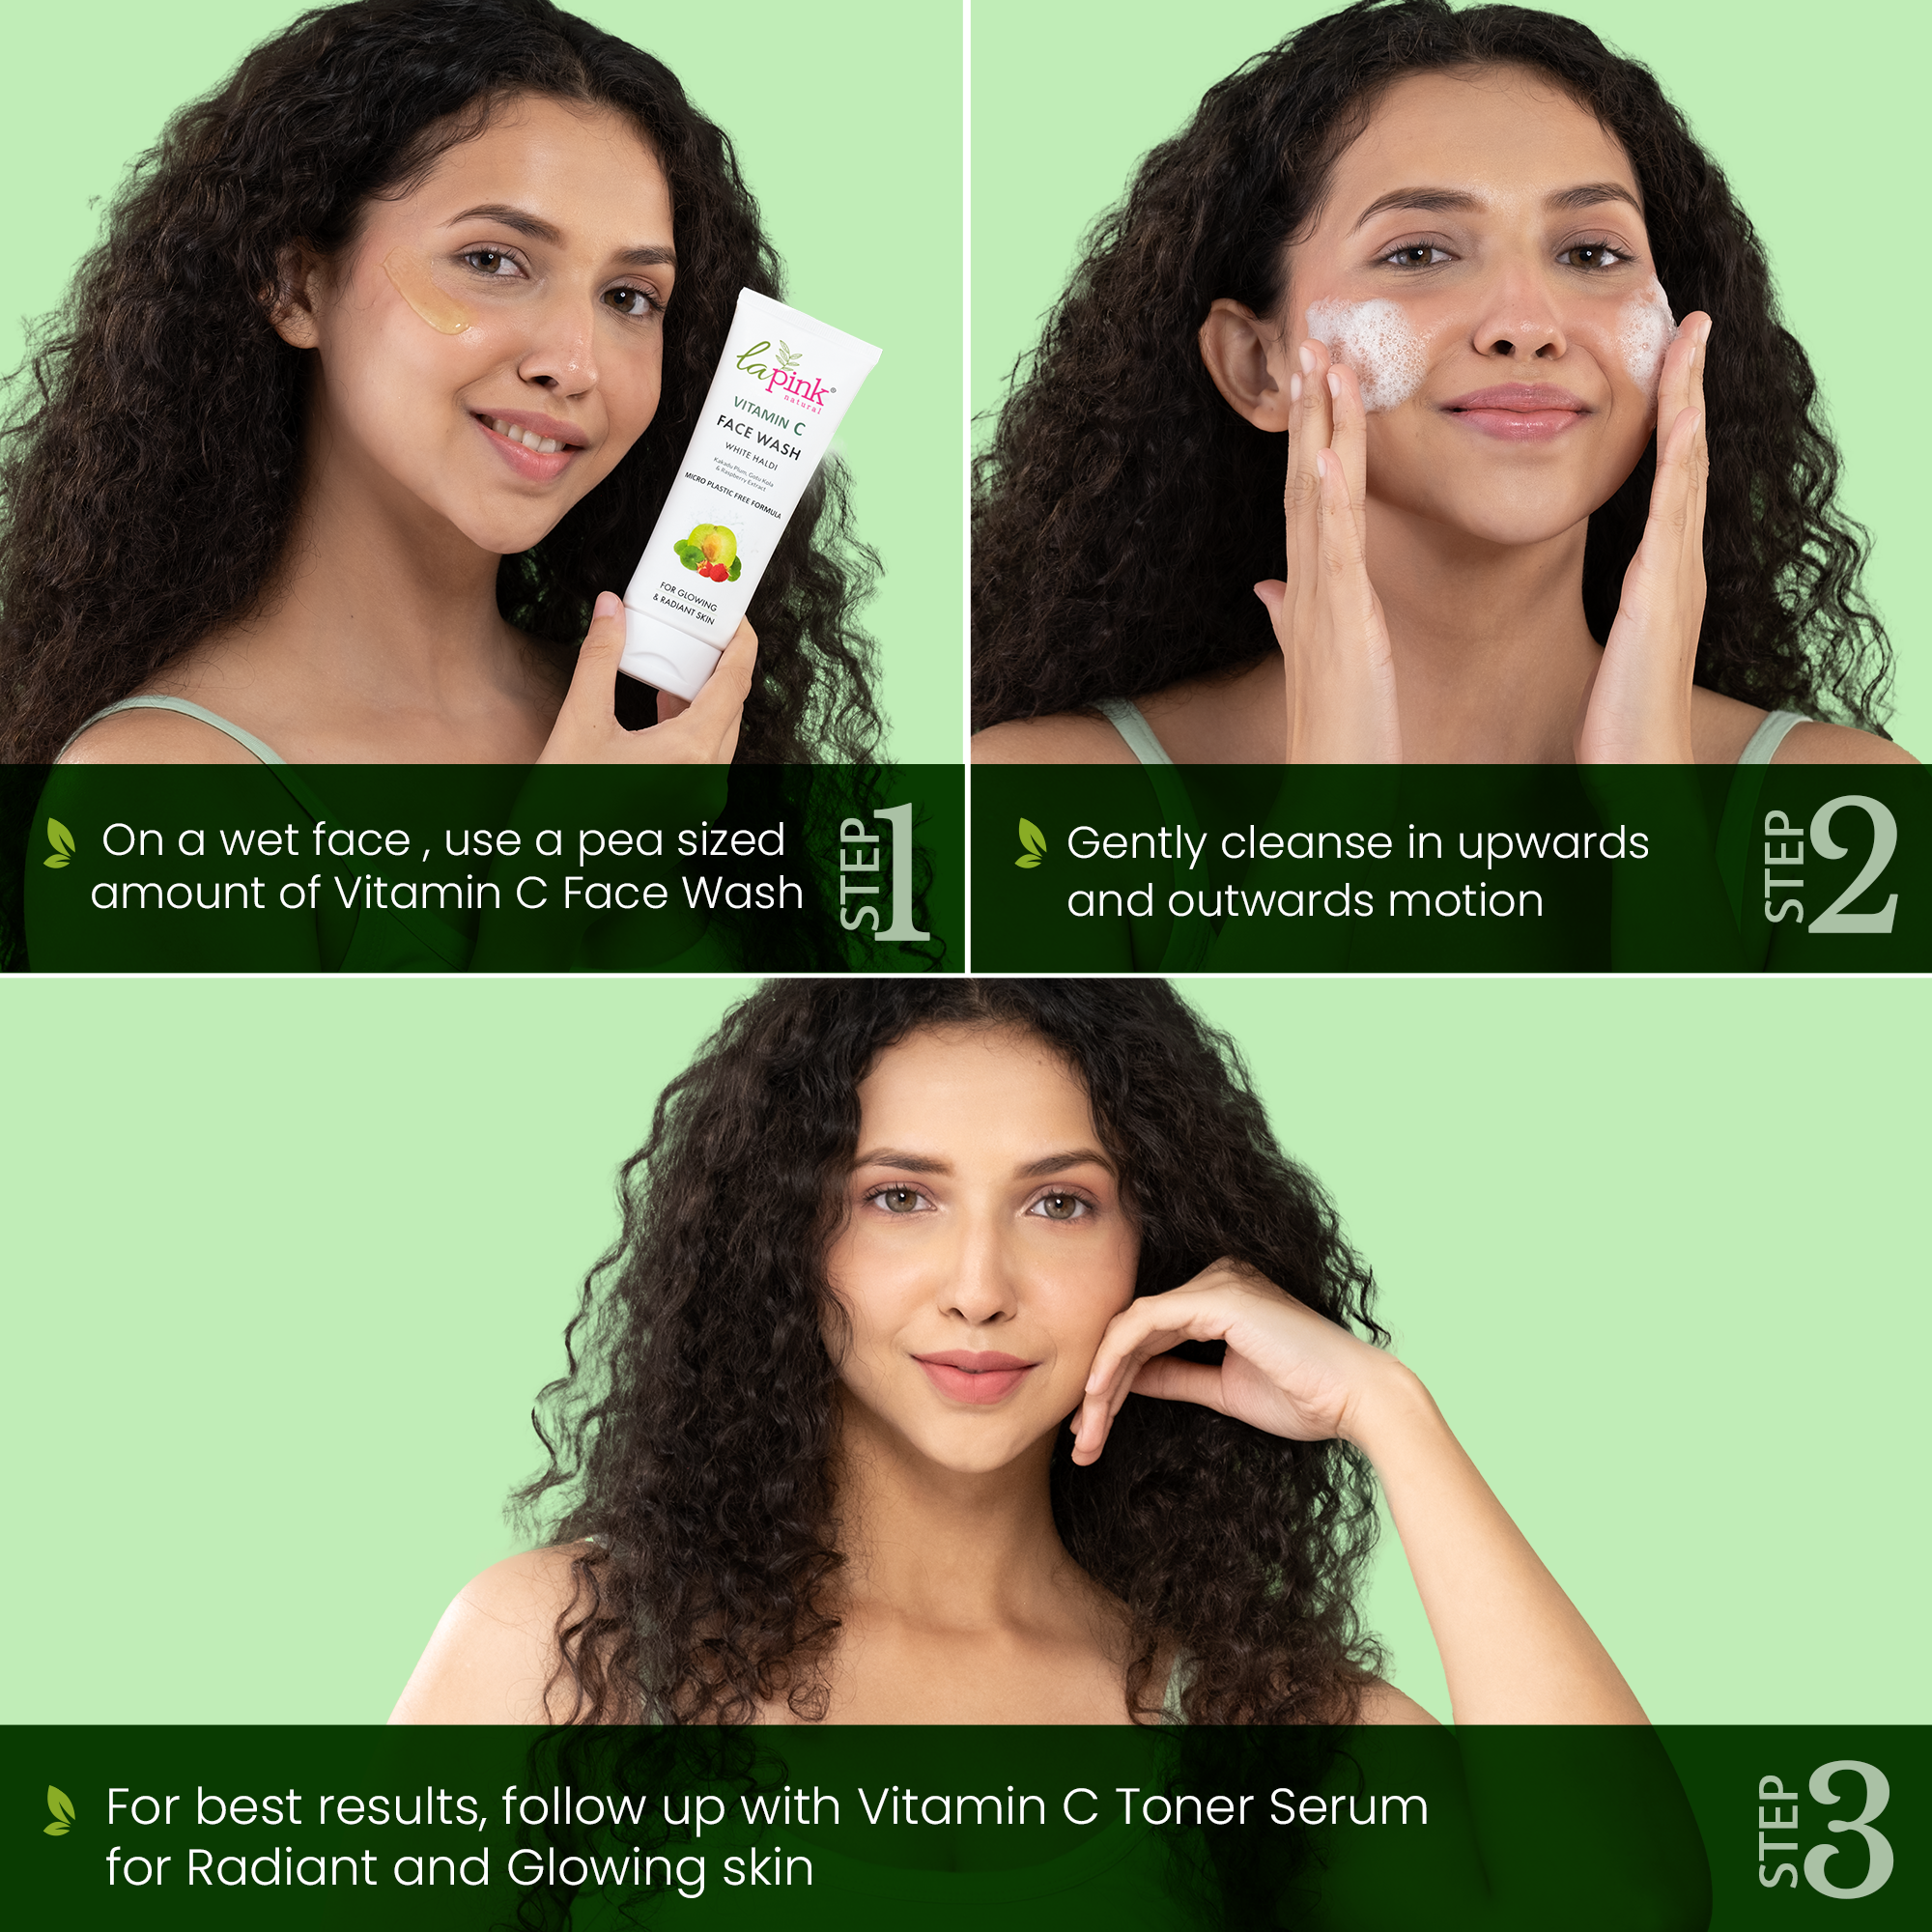 Vitamin C Face Wash with White Haldi for Glowing &amp; Radiant Skin